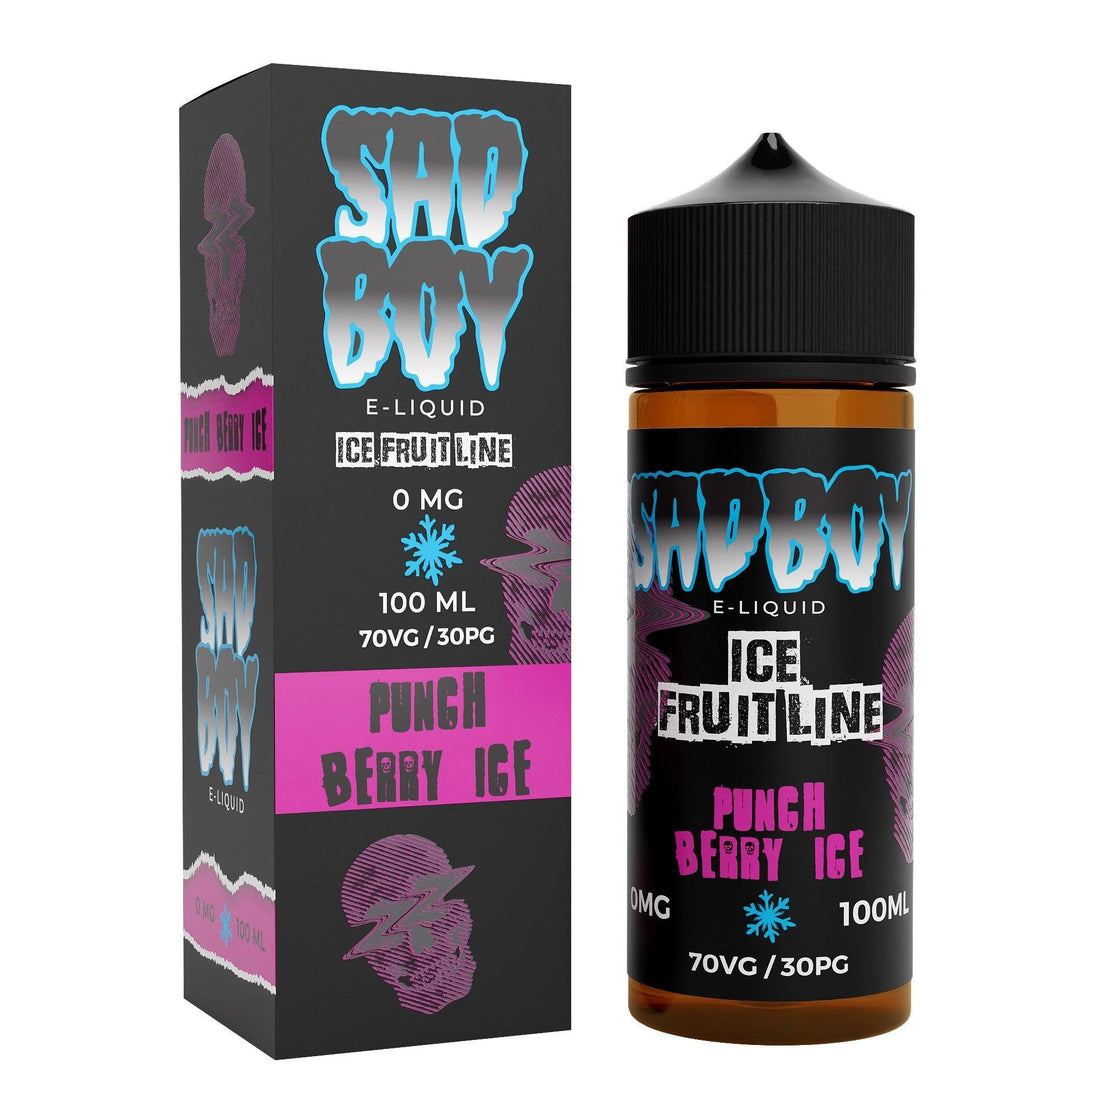 ICED FRUIT LINE: PUNCH BERRY ICE 100ML SHORT FILL E-LIQUID BY SAD BOY - Vapeslough